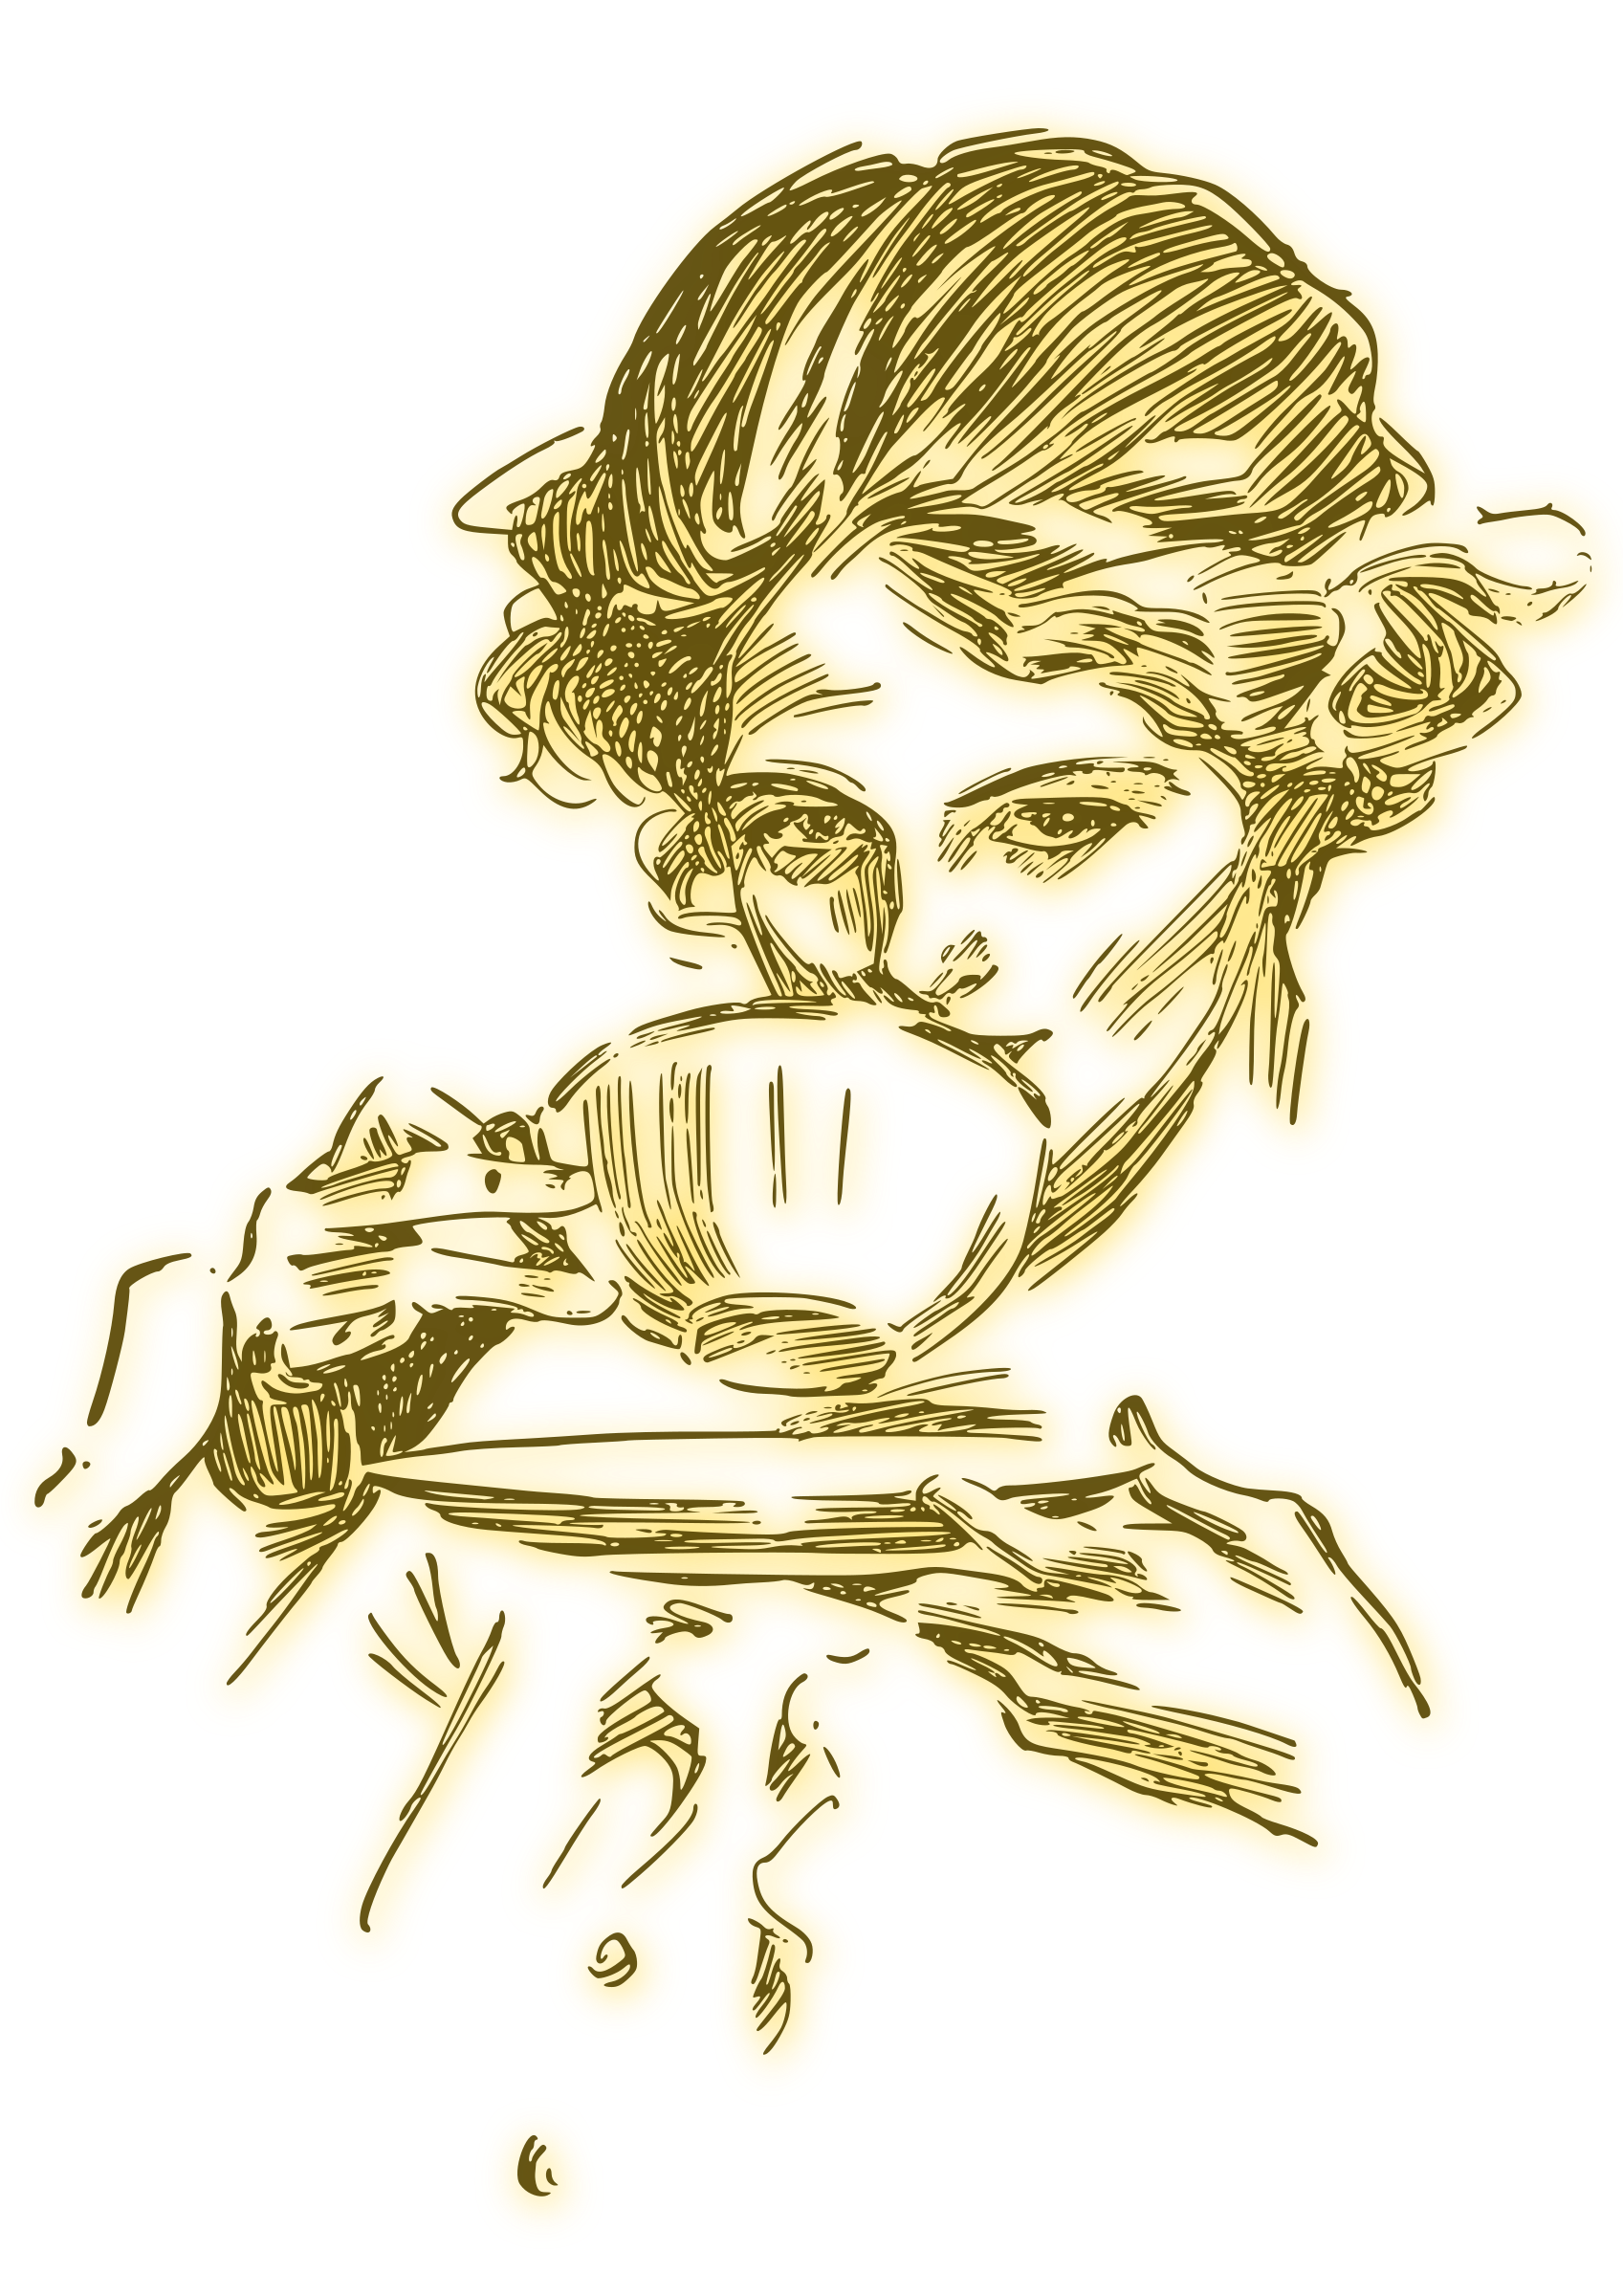 clipart coffee woman